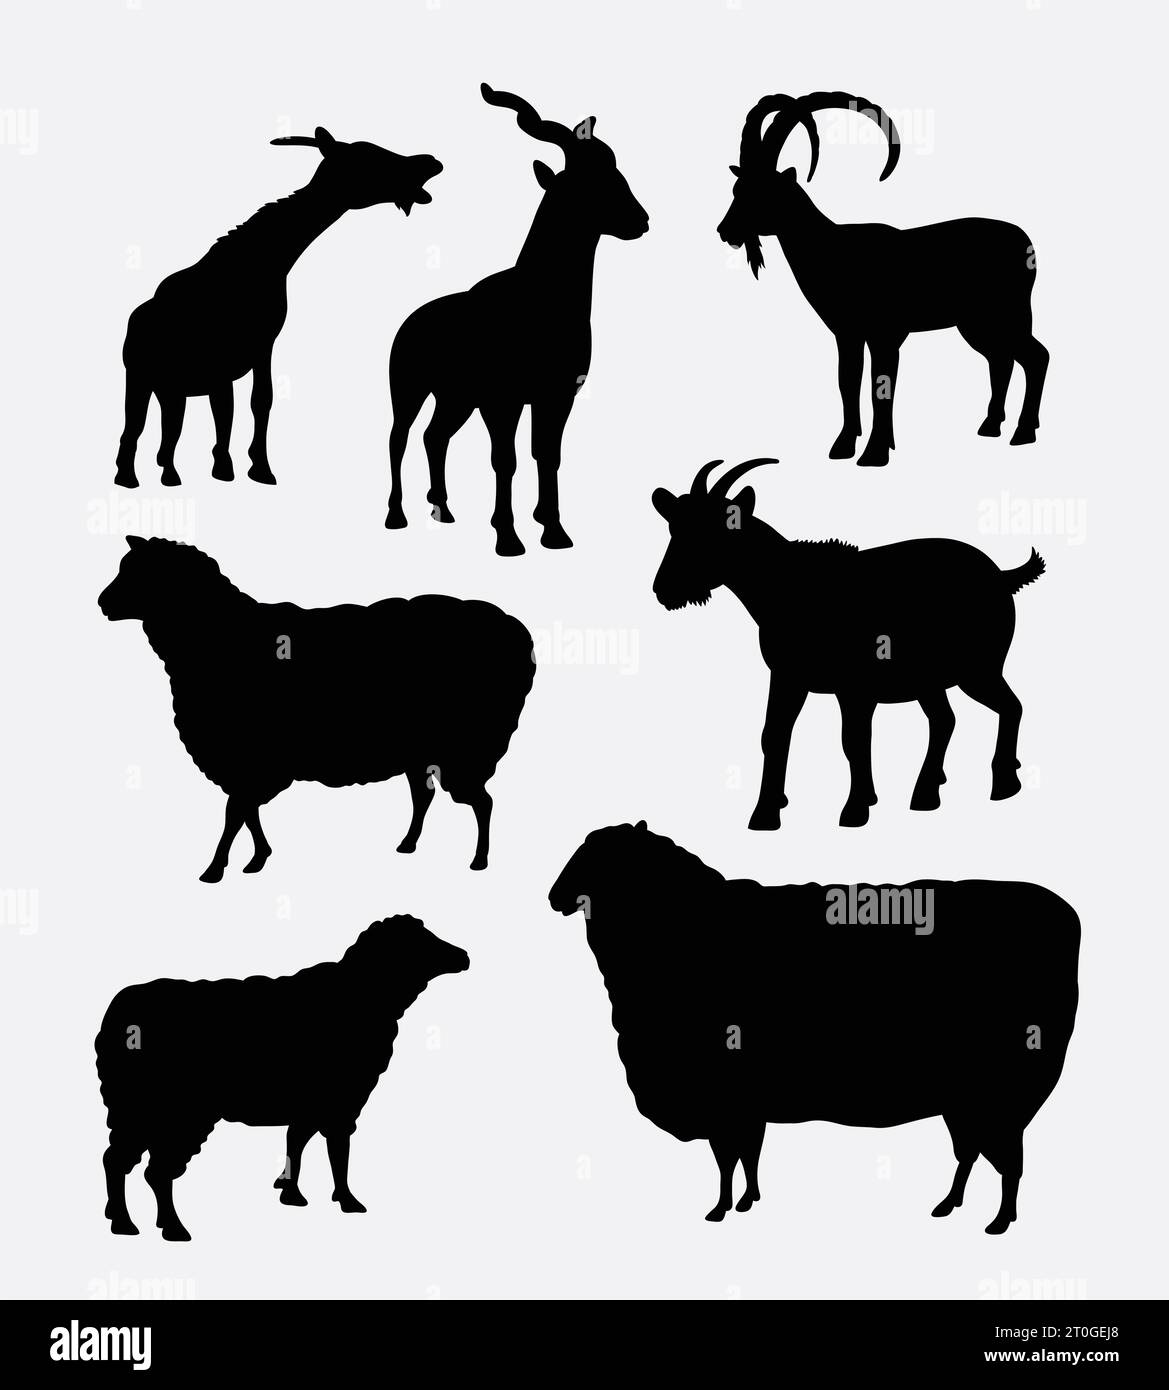 goat and sheep animal silhouette Stock Vector